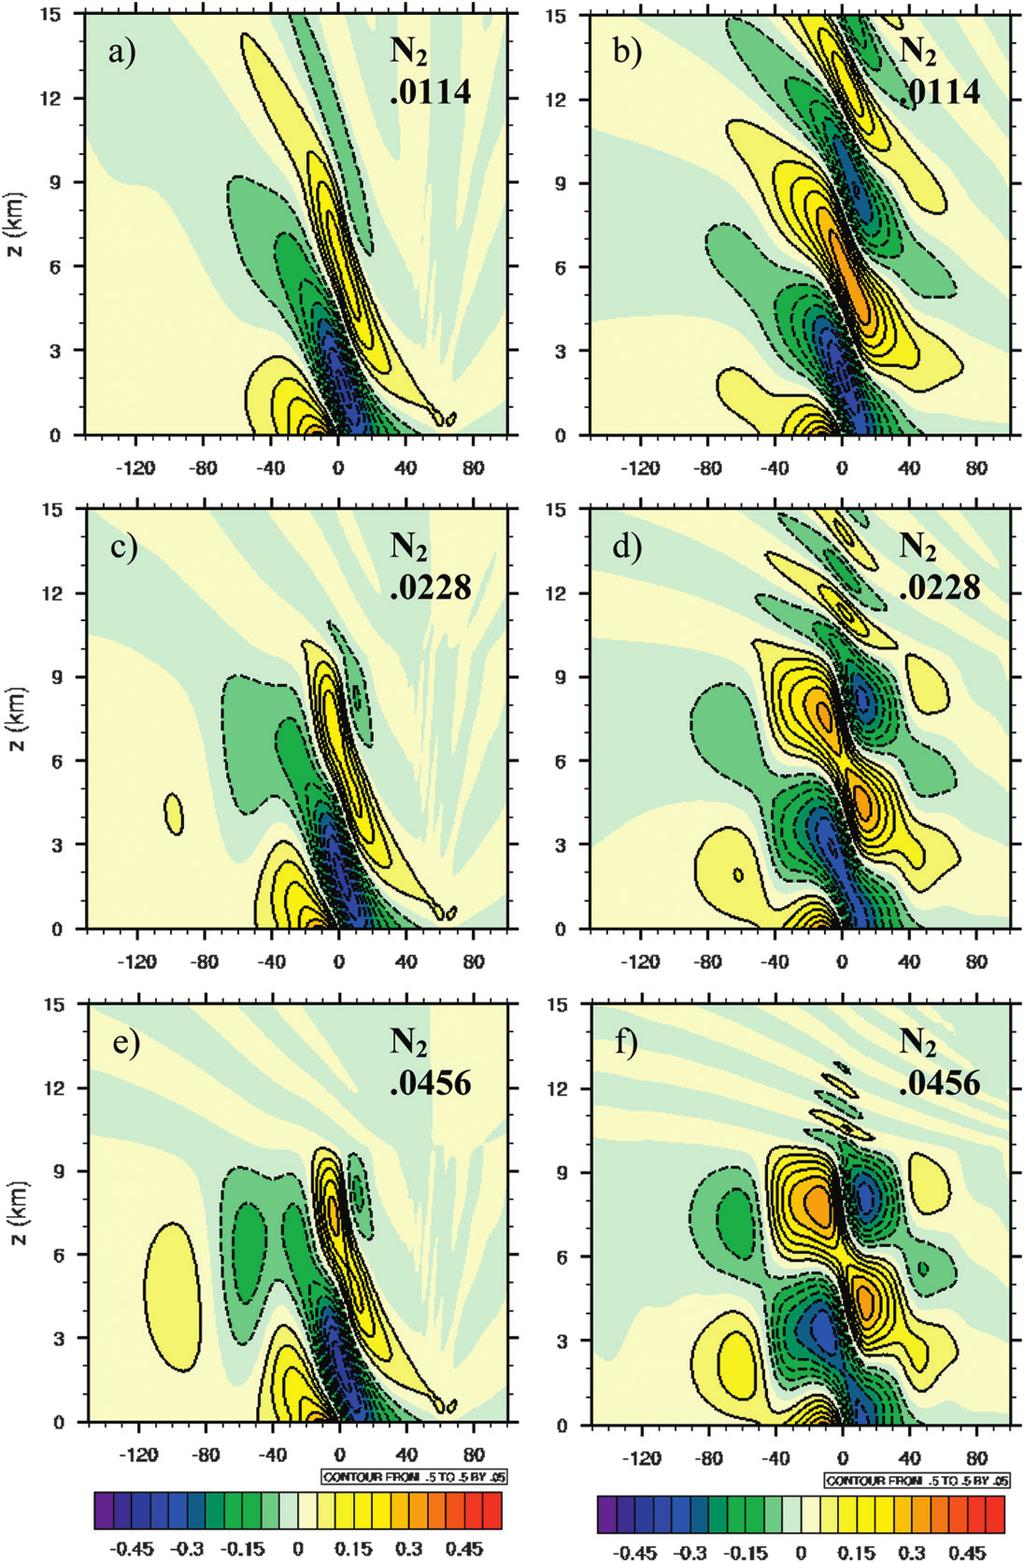 OCTOBER 2012 KELLER ET AL. FIG. 8. Vertical velocity at 1.5 and 5 h for troposphere stratosphere simulations using the nonlinear gravity wave model and varying stratospheric stability.